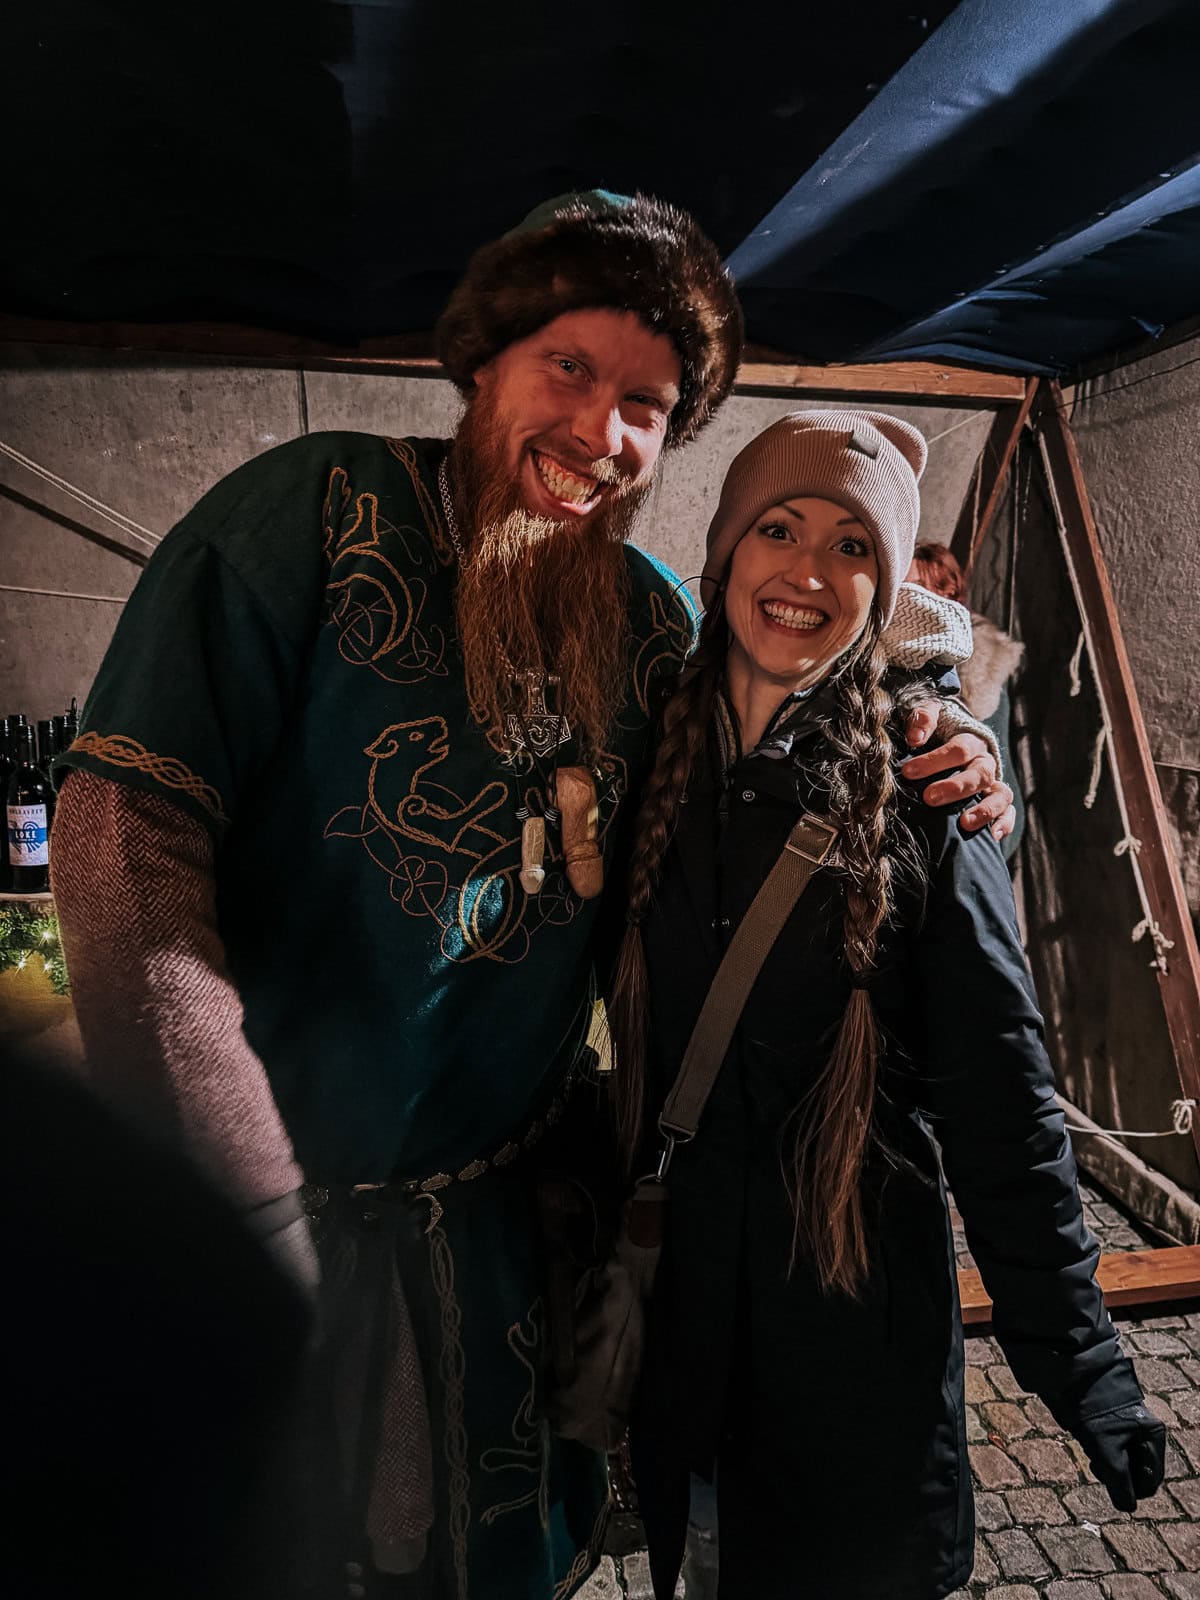 A man and a woman in Viking costumes smiling for a photo at a Christmas event, the man wearing a green tunic and fur hat, and the woman in a white beanie and black coat.